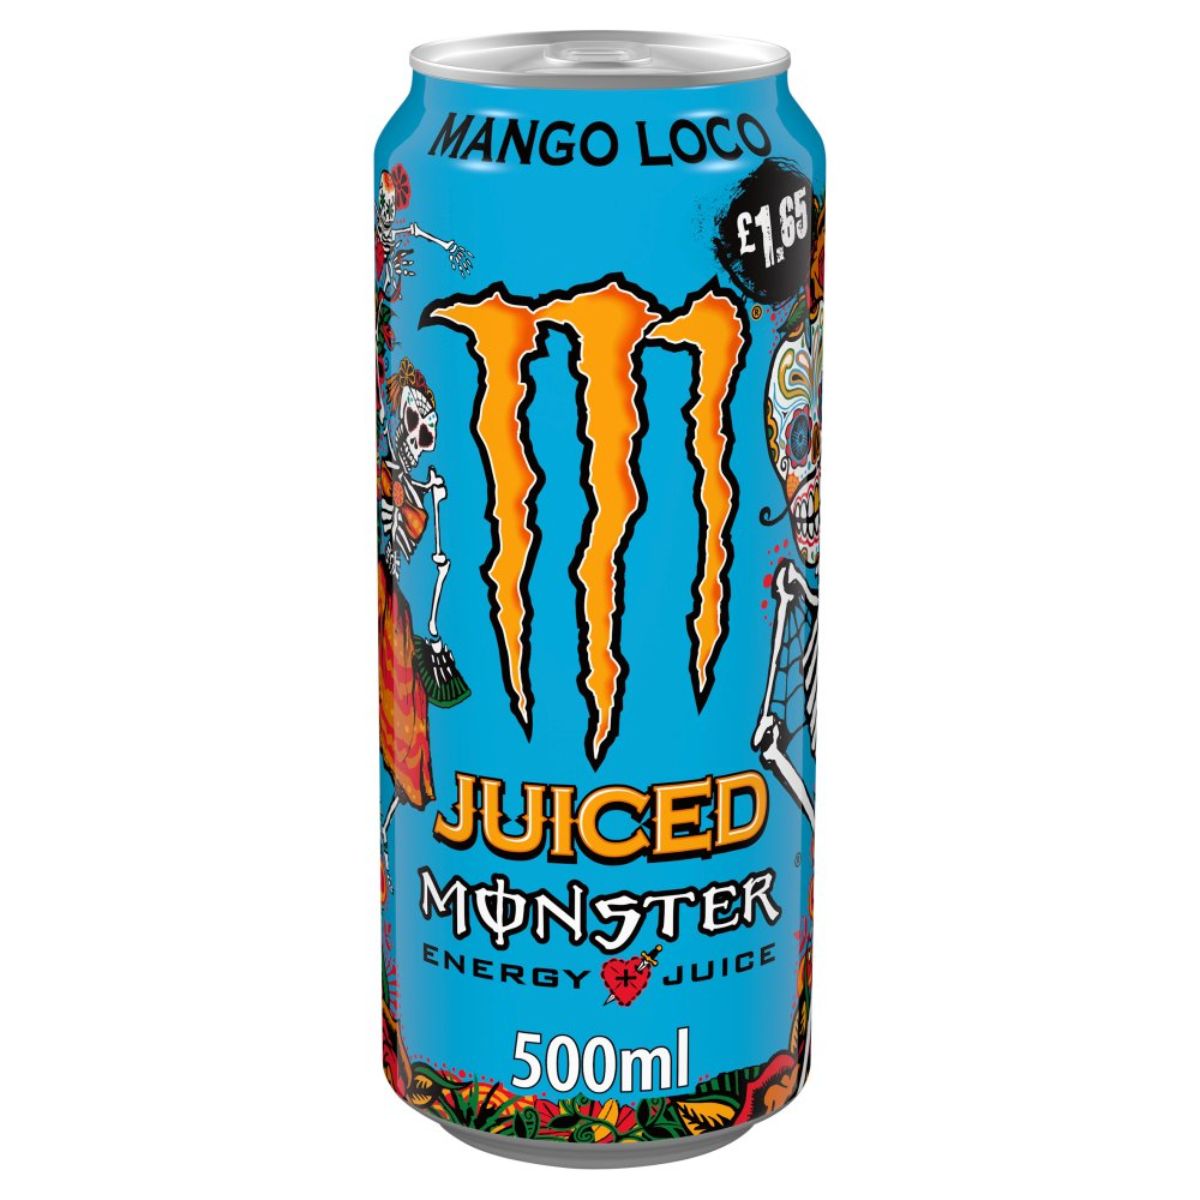 A can of Monster - Mango Loco Energy Drink - 500ml with a skull on it.